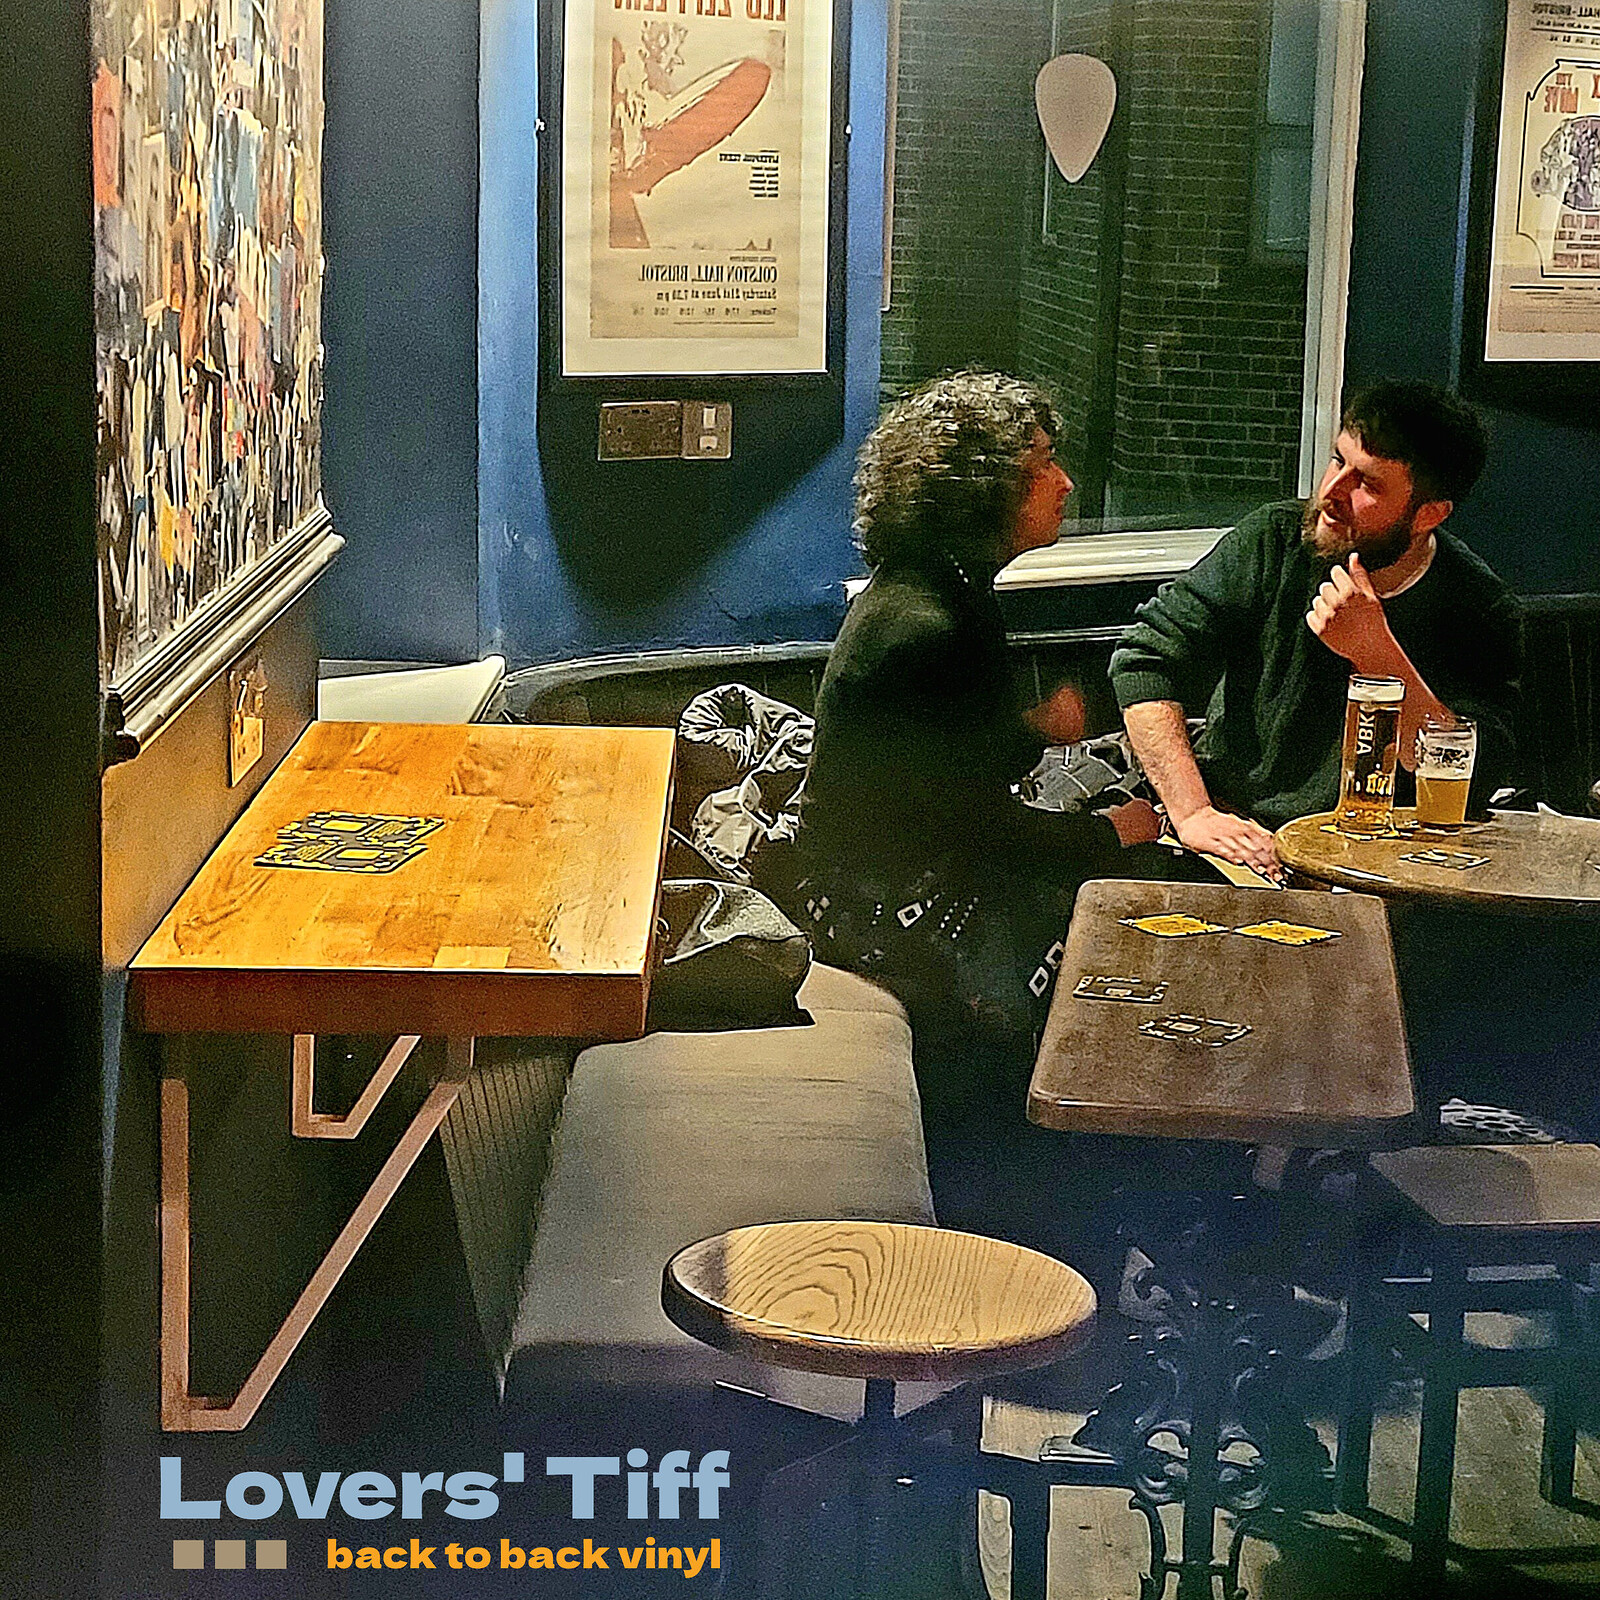 On the Decks: Lovers' Tiff at The Hare on the Hill